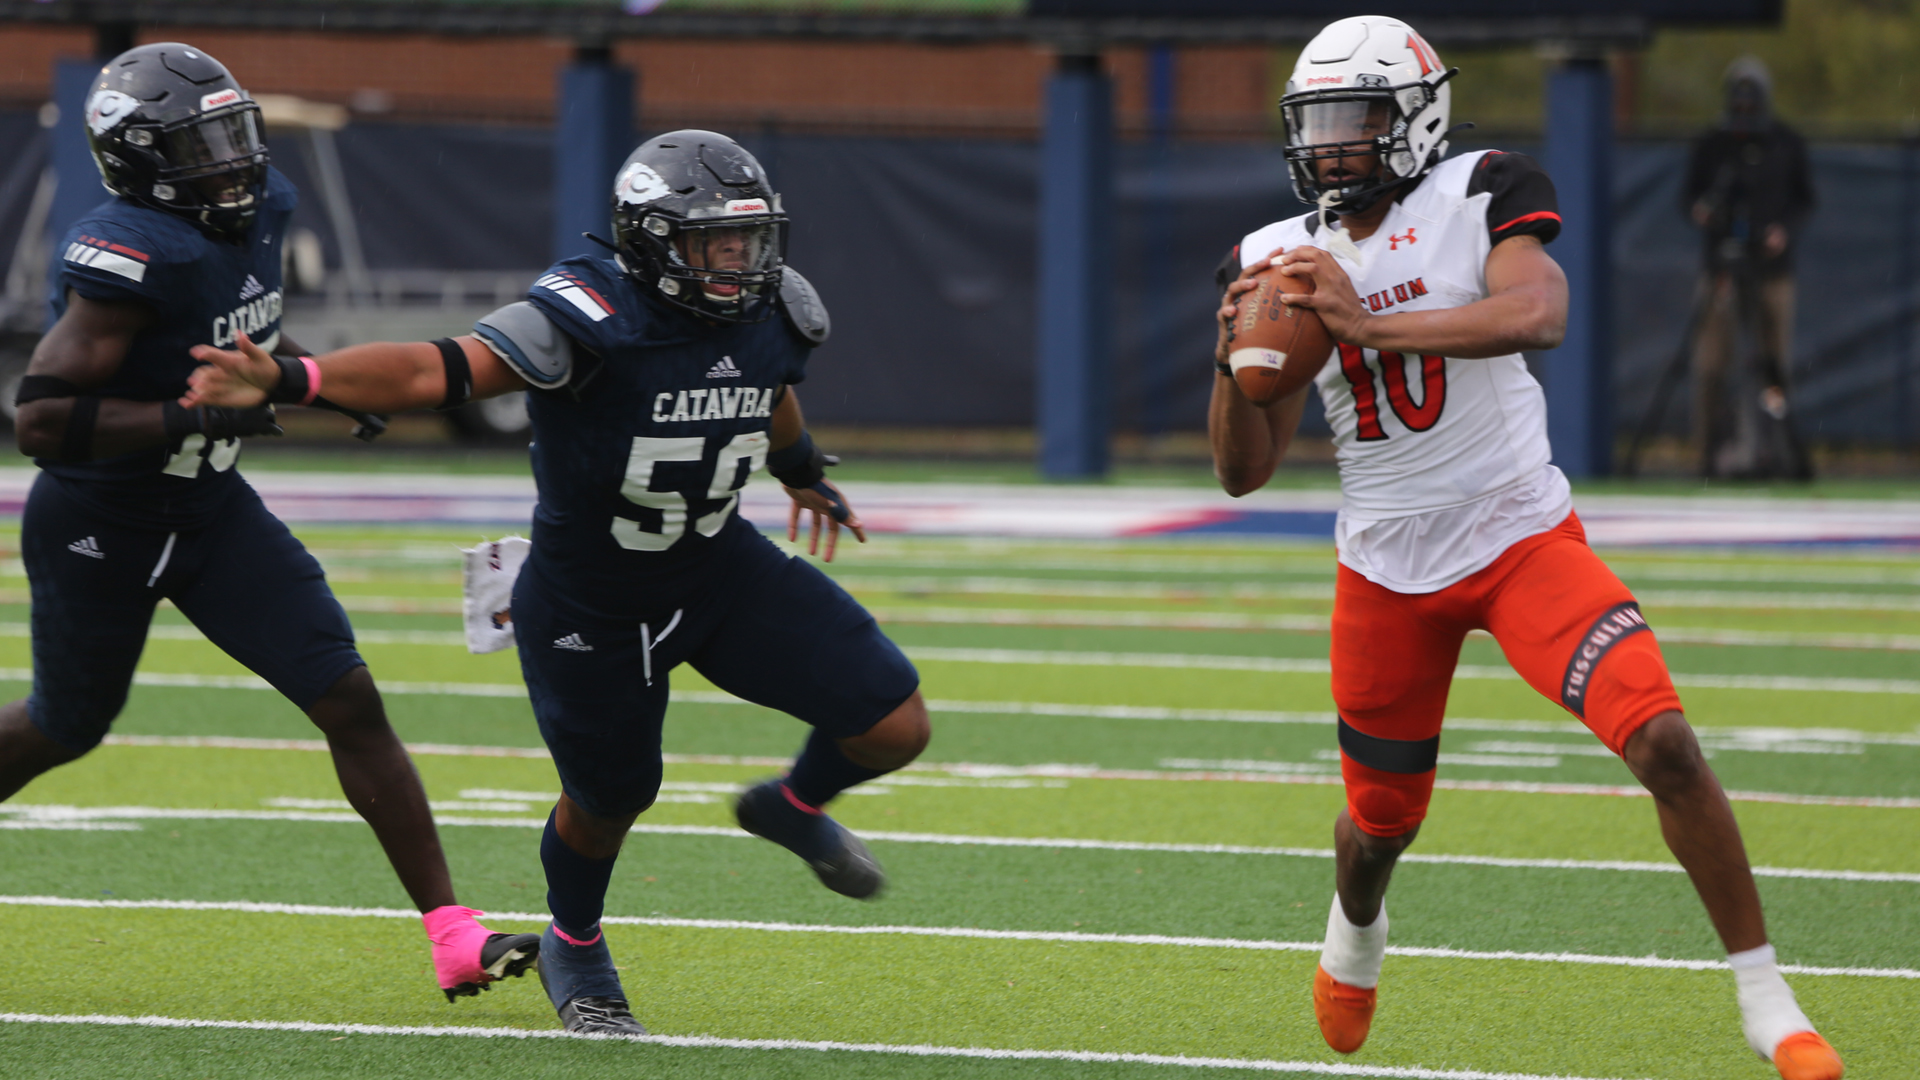 Tre Simmons accounted for 3 second-half touchdowns in Tusculum's road contest at Catawba